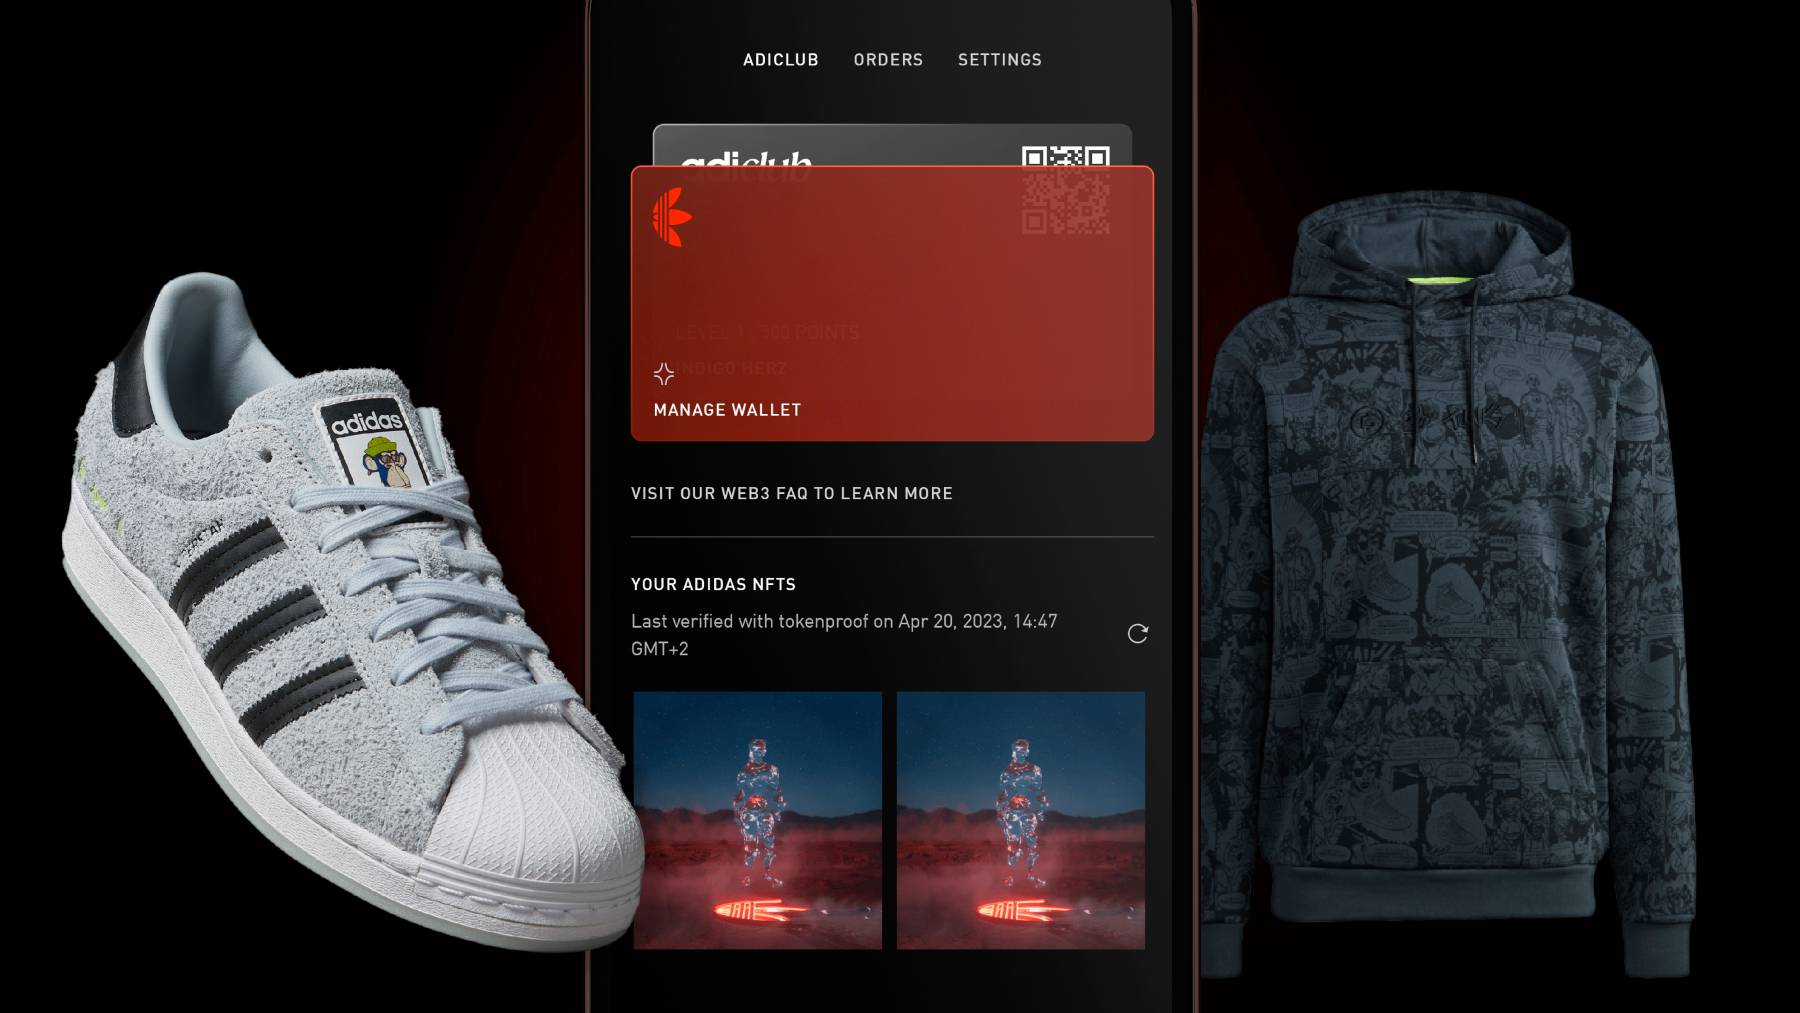 An Adidas Superstar sneaker and special collaboration hoodie float on either side of the brand's Confirmed app, which displays two Adidas NFTs.